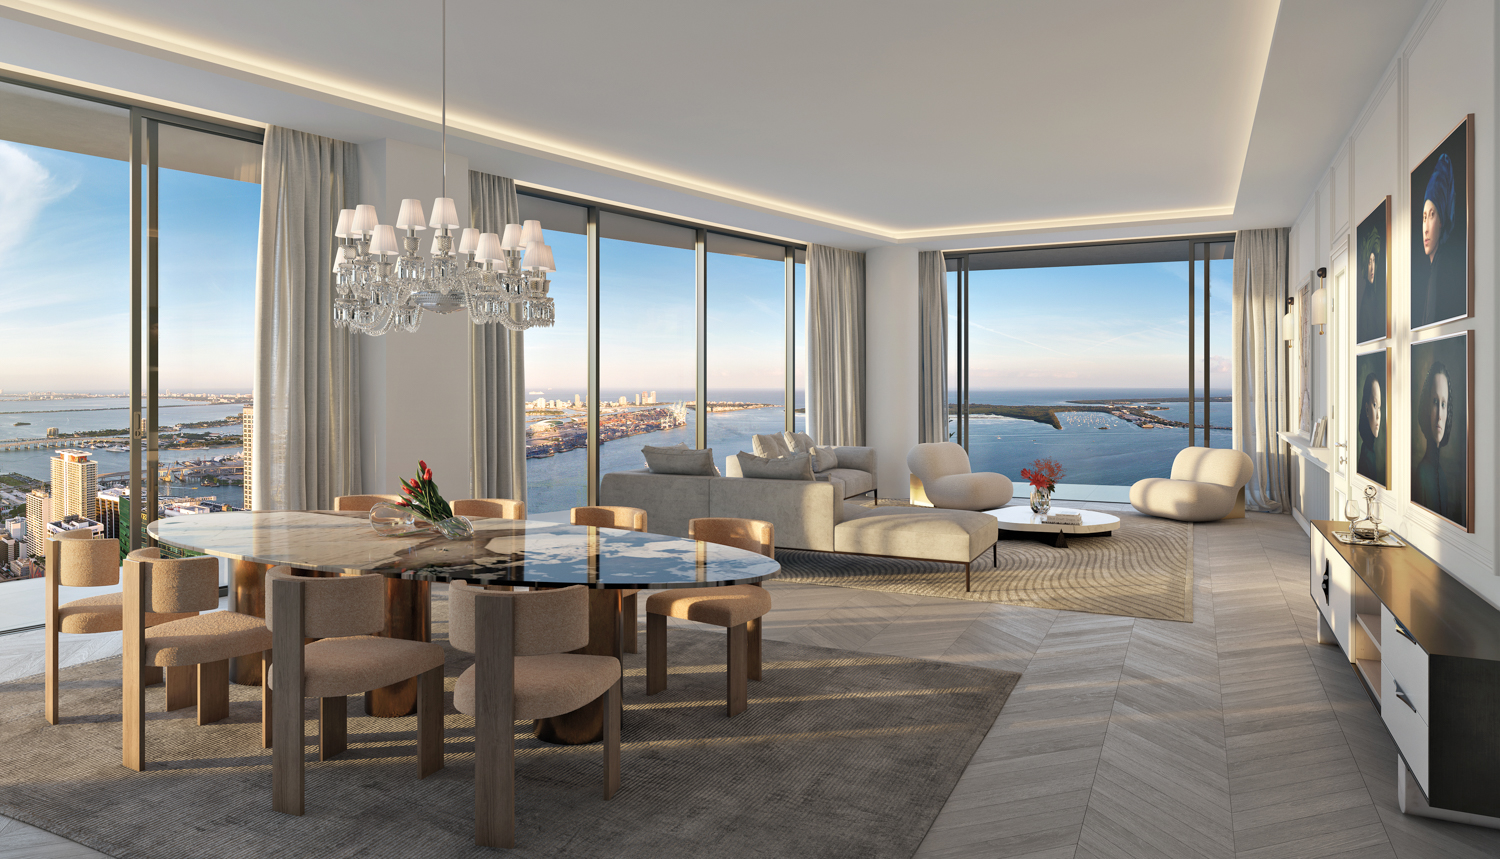 Glamorous dining and living area at the Baccarat Residences Brickell